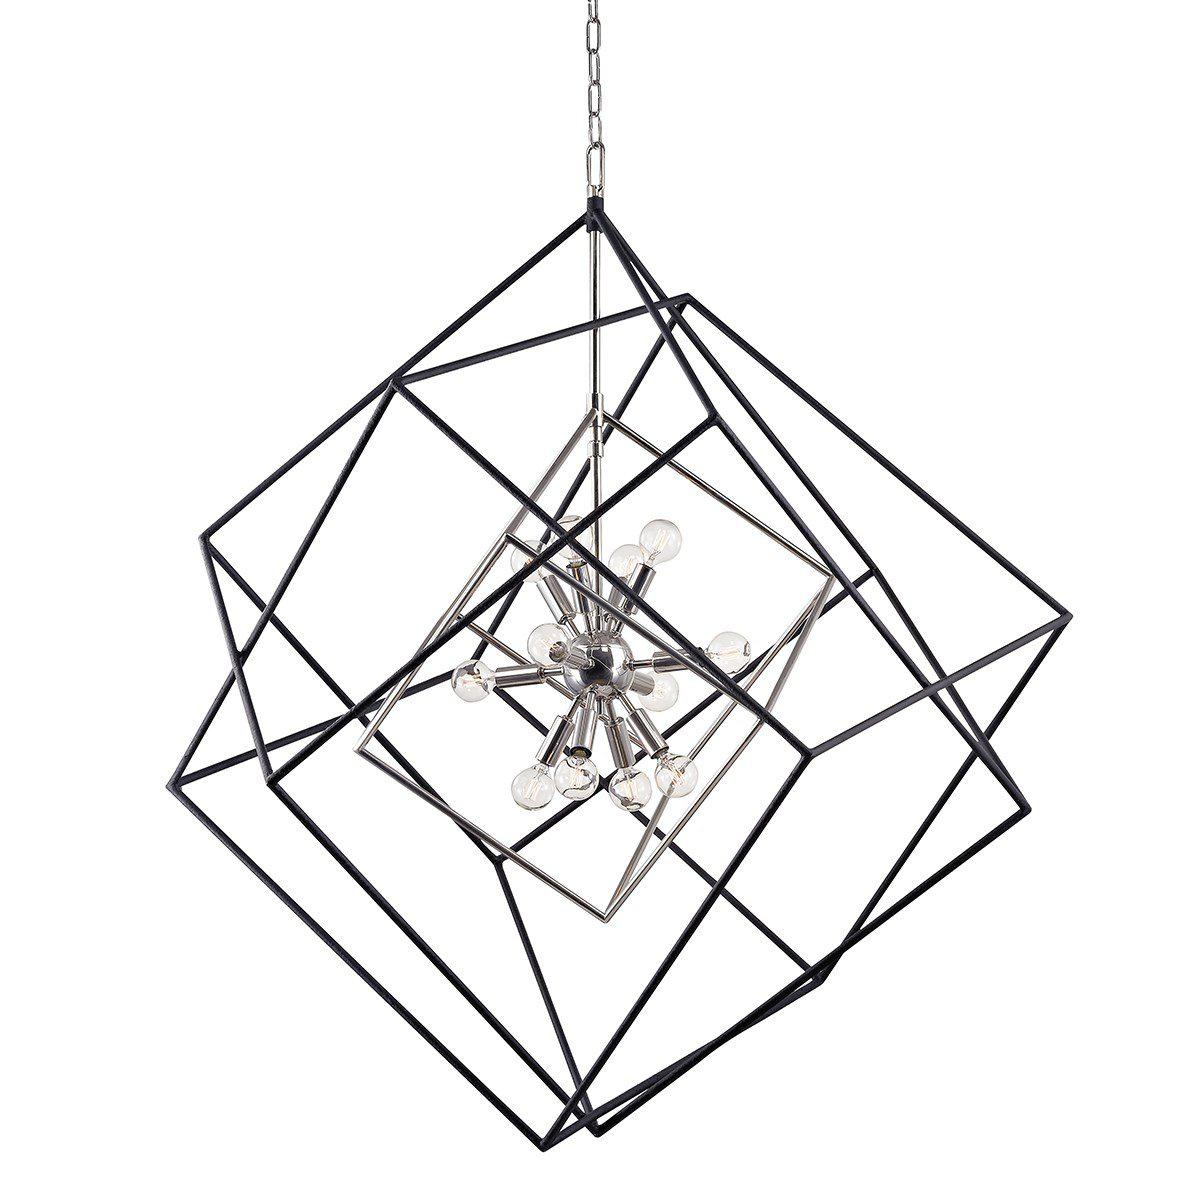 Roundout - 12 LIGHT PENDANT Chandeliers Hudson Valley Polished Nickel  